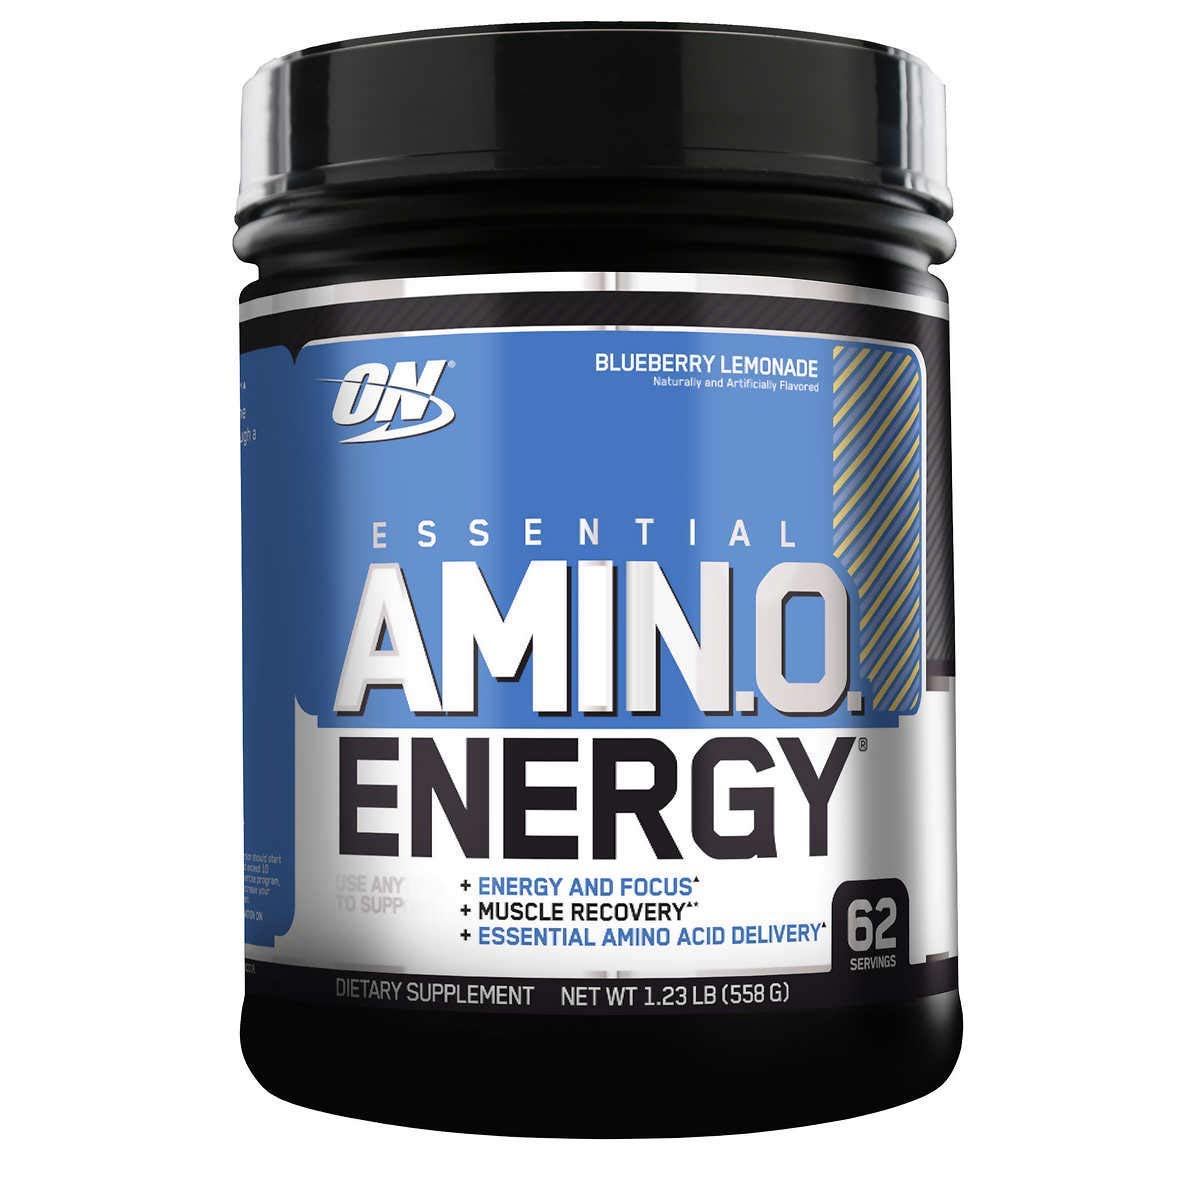 Optimum Nutrition Essential Amino Energy with Green Tea and Green Coffee Extract, Flavor: Blueberry Lemonade, 62 Servings